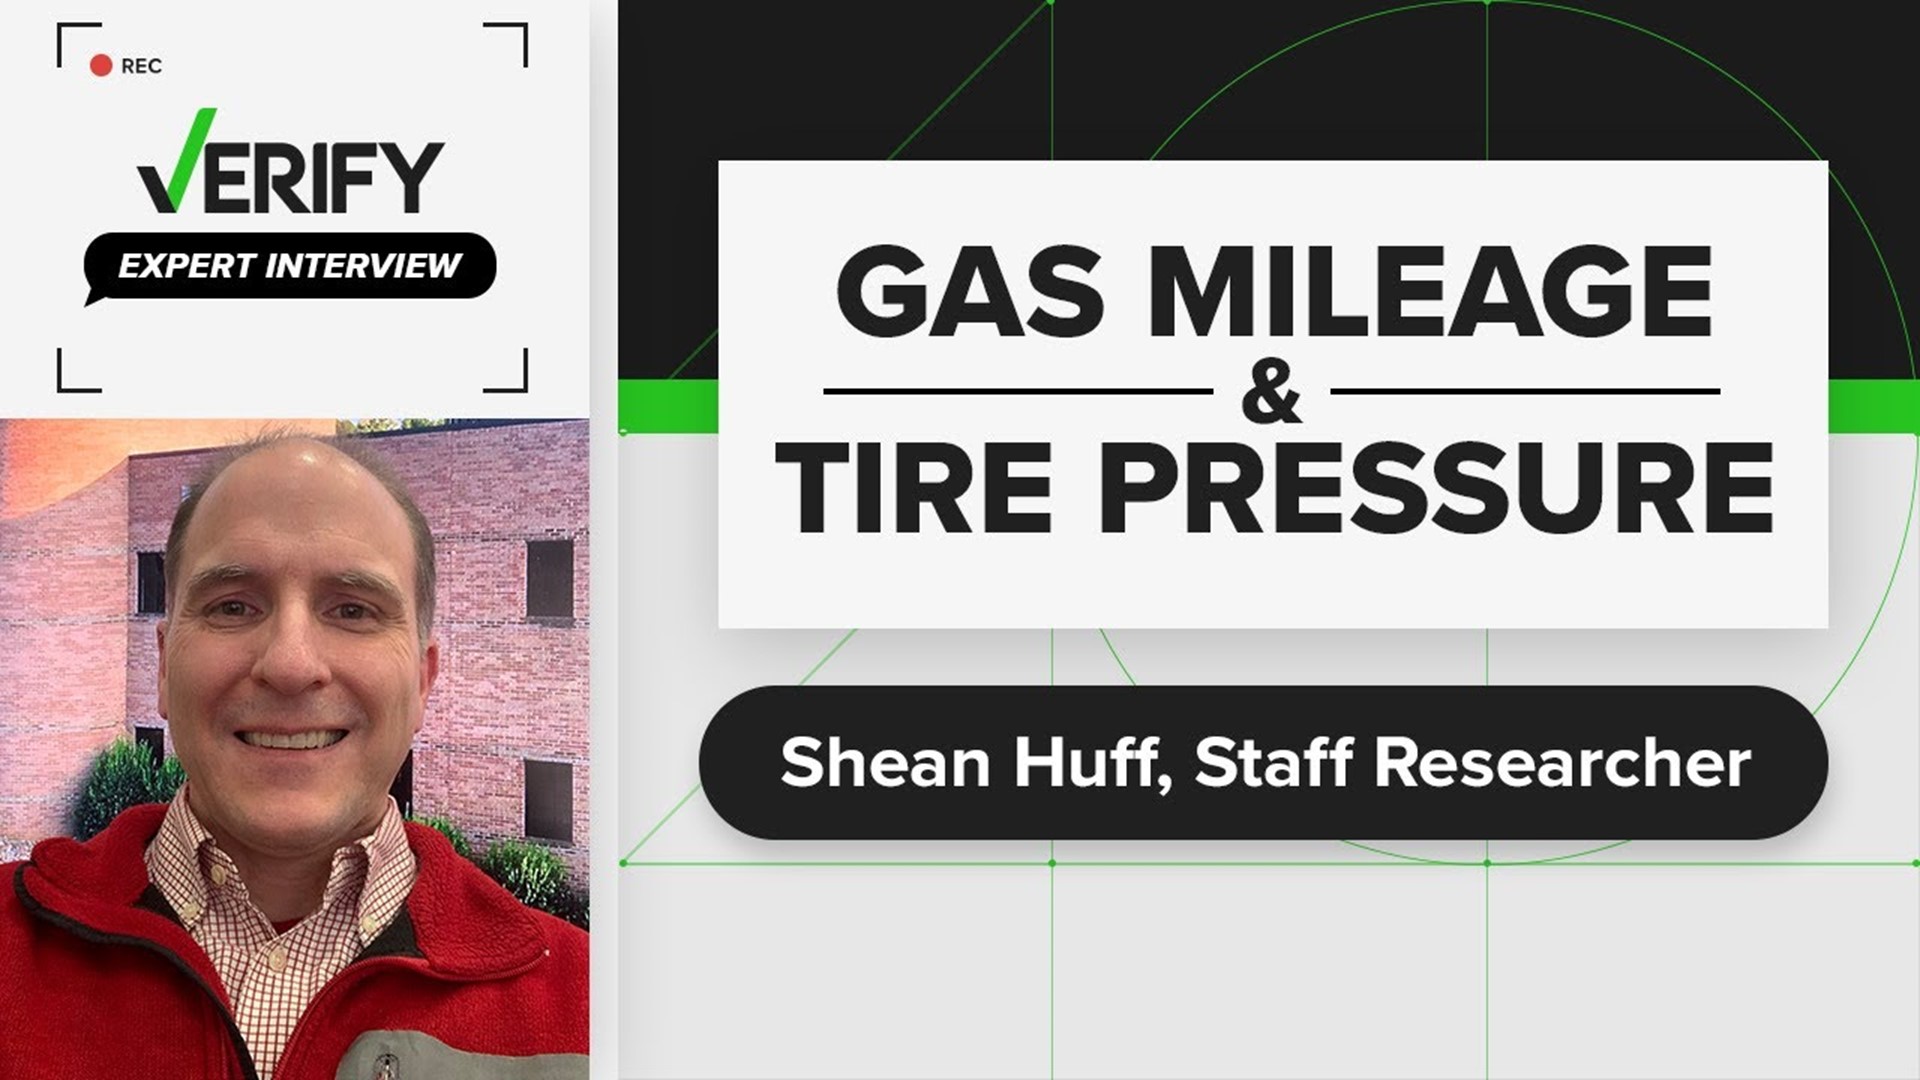 VERIFY spoke to Shean Huff, a staff researcher at the Oak Ridge National Laboratory about the best ways to improve your car's gas mileage.